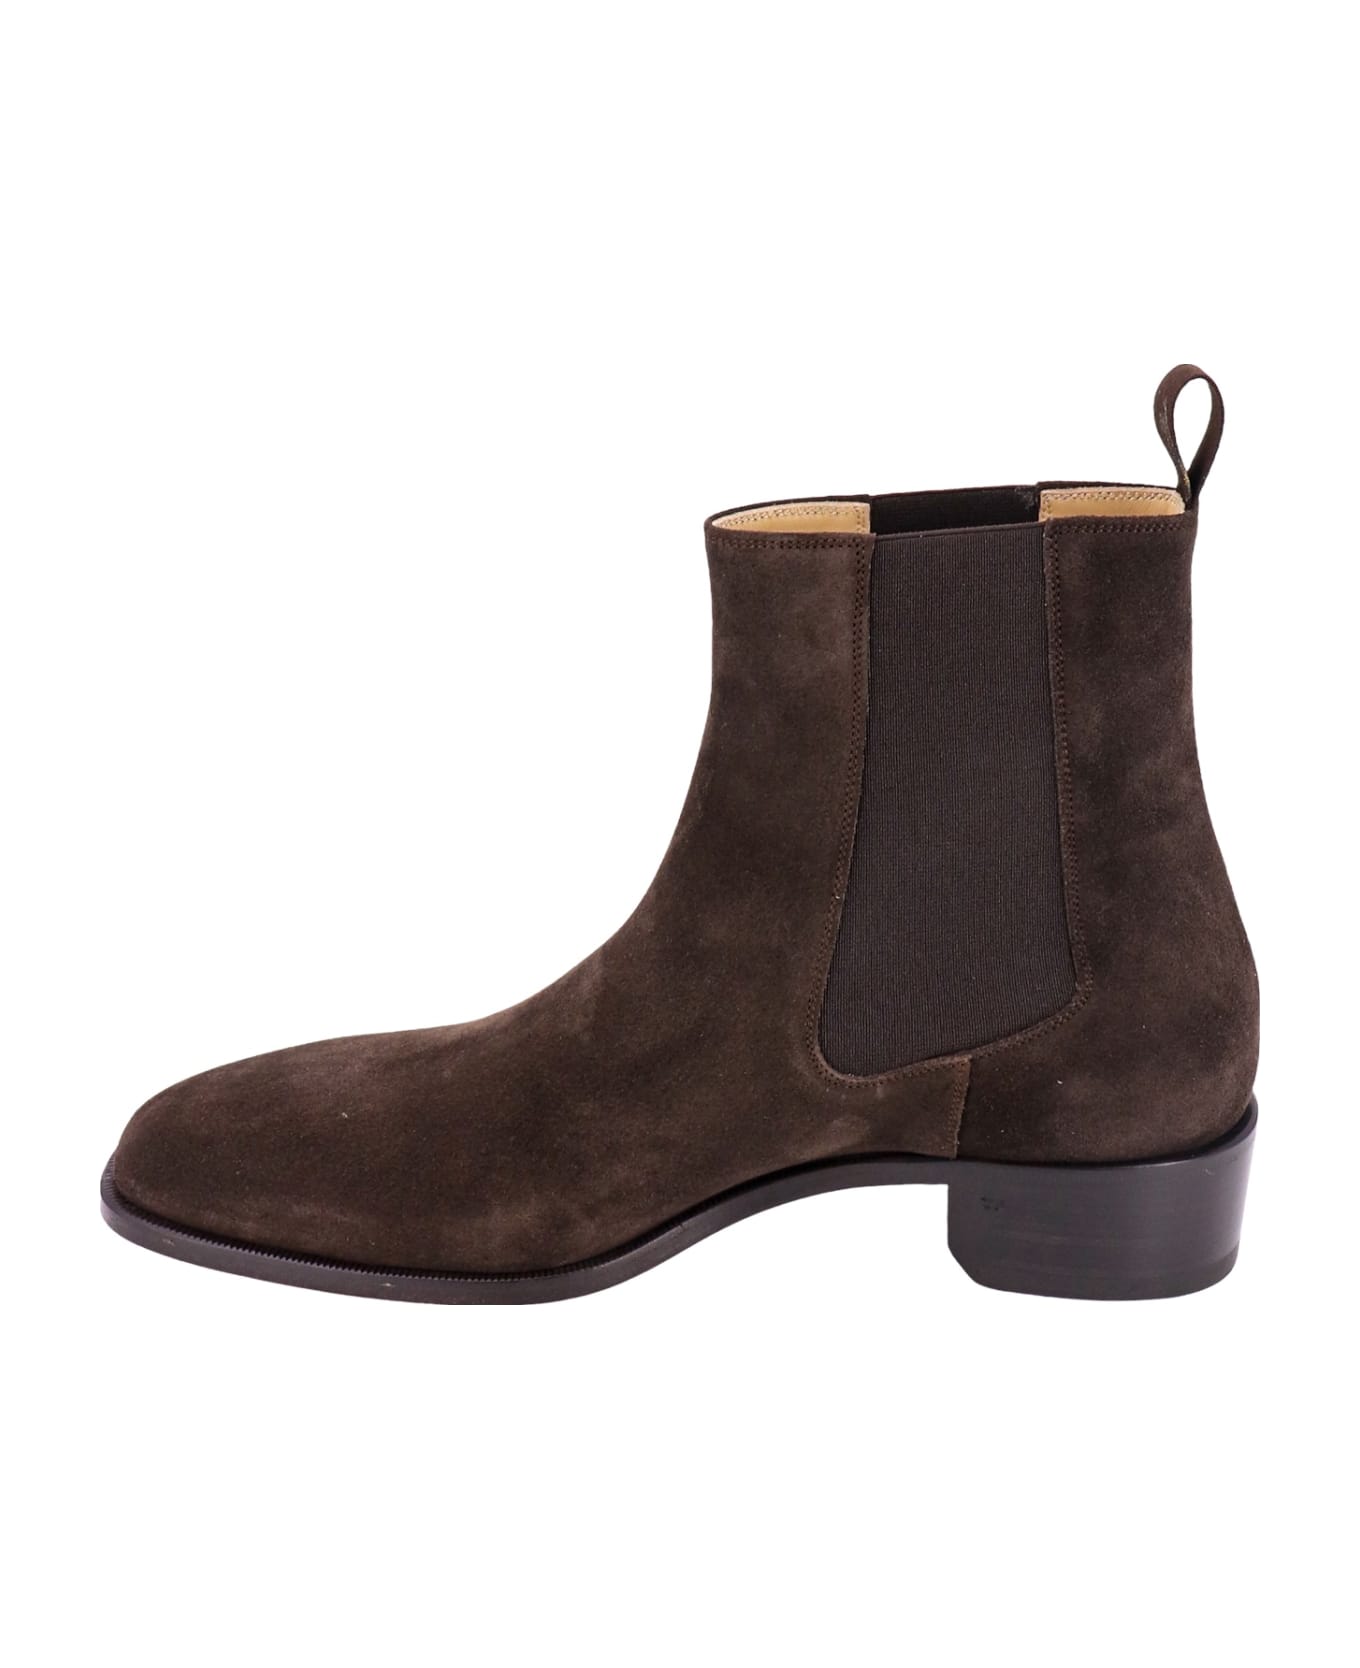 Tom Ford Boots - Brown